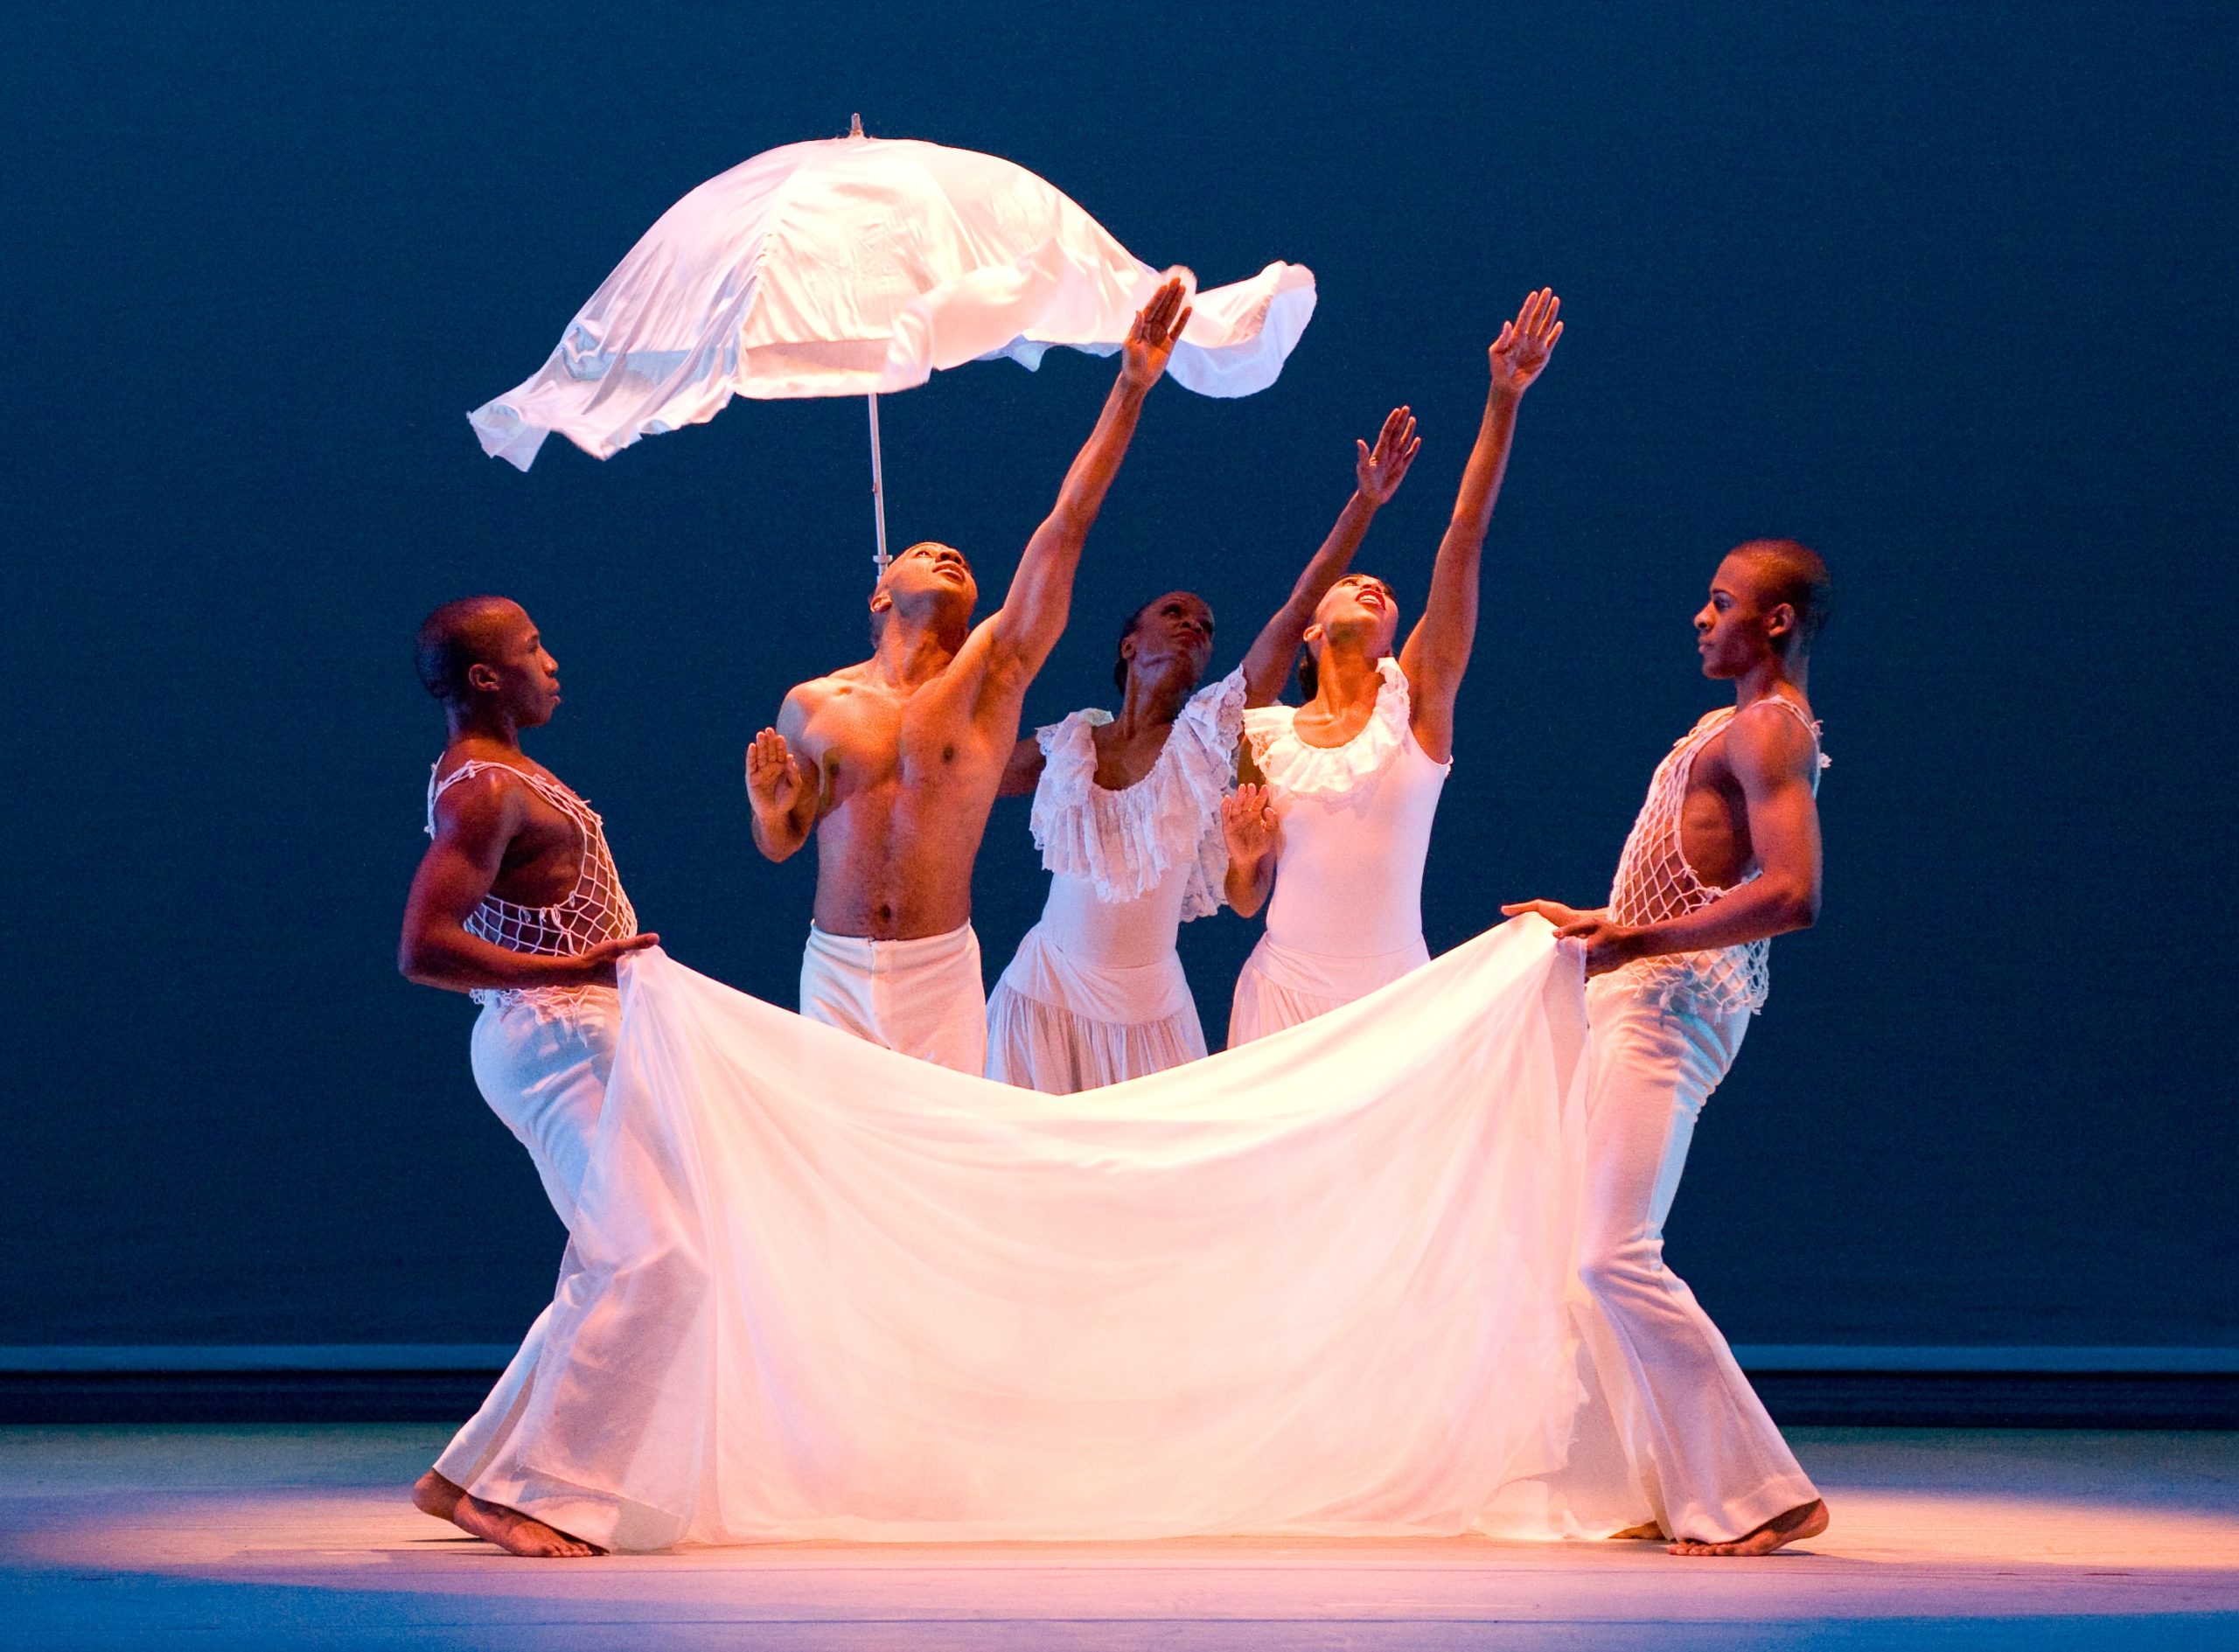 Five dancers stand in a shallow semi circle around a white cloth that they hold up to their legs. One also holds a white cloth umbrella above them. They all look up into the air, and the three middle dancers reach their arms upward with palms facing forward.